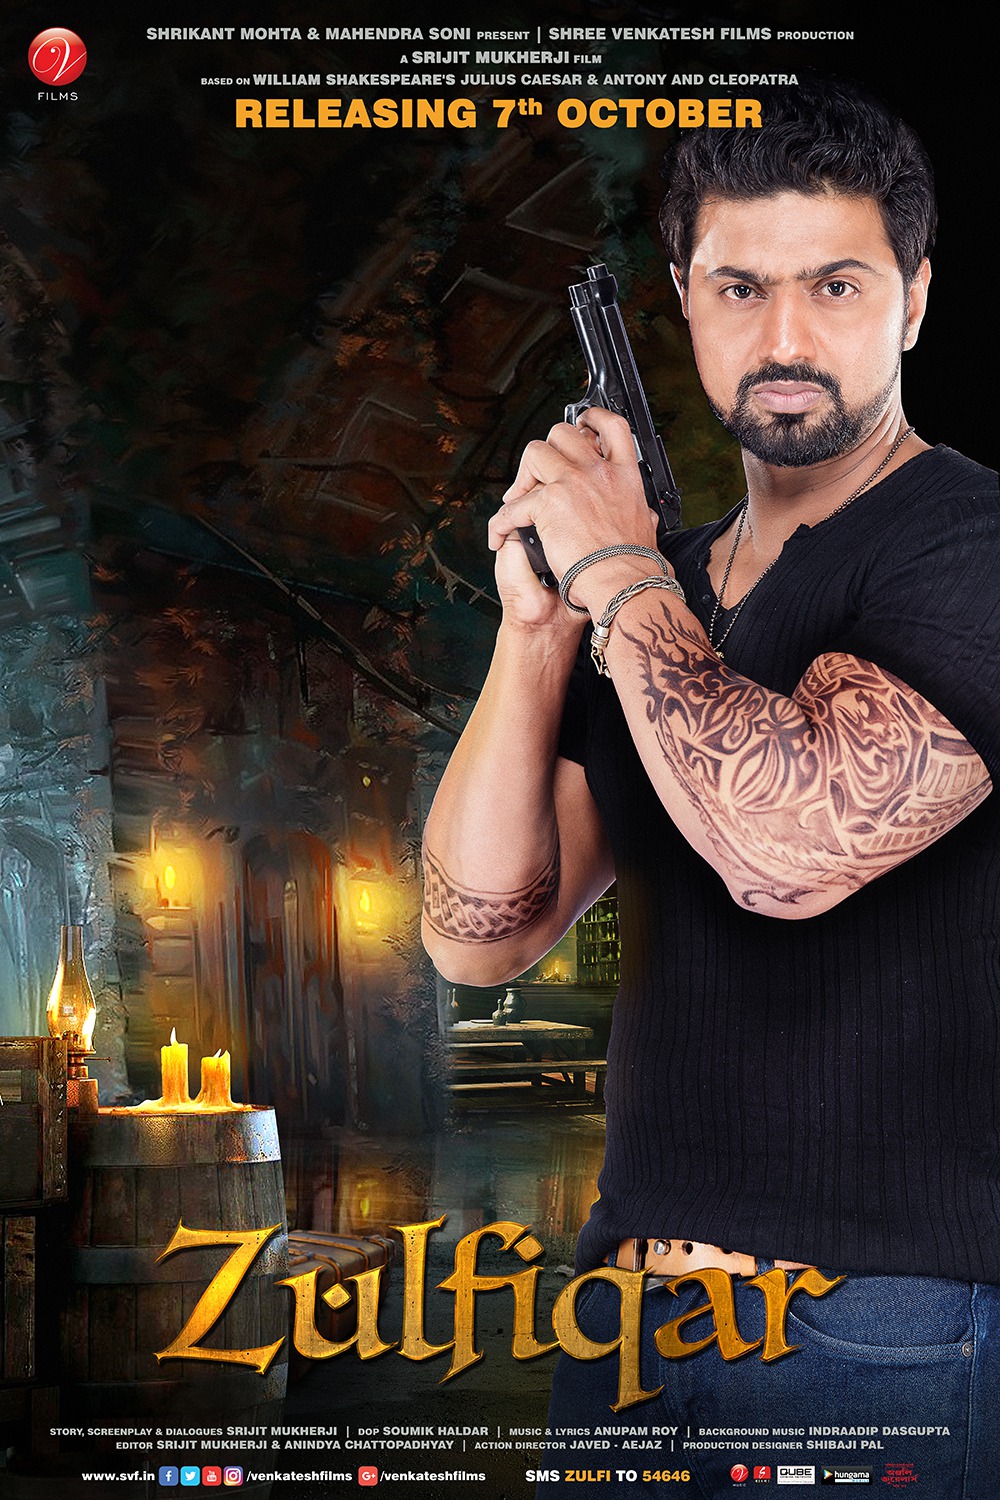 Extra Large Movie Poster Image for Zulfiqar (#3 of 9)